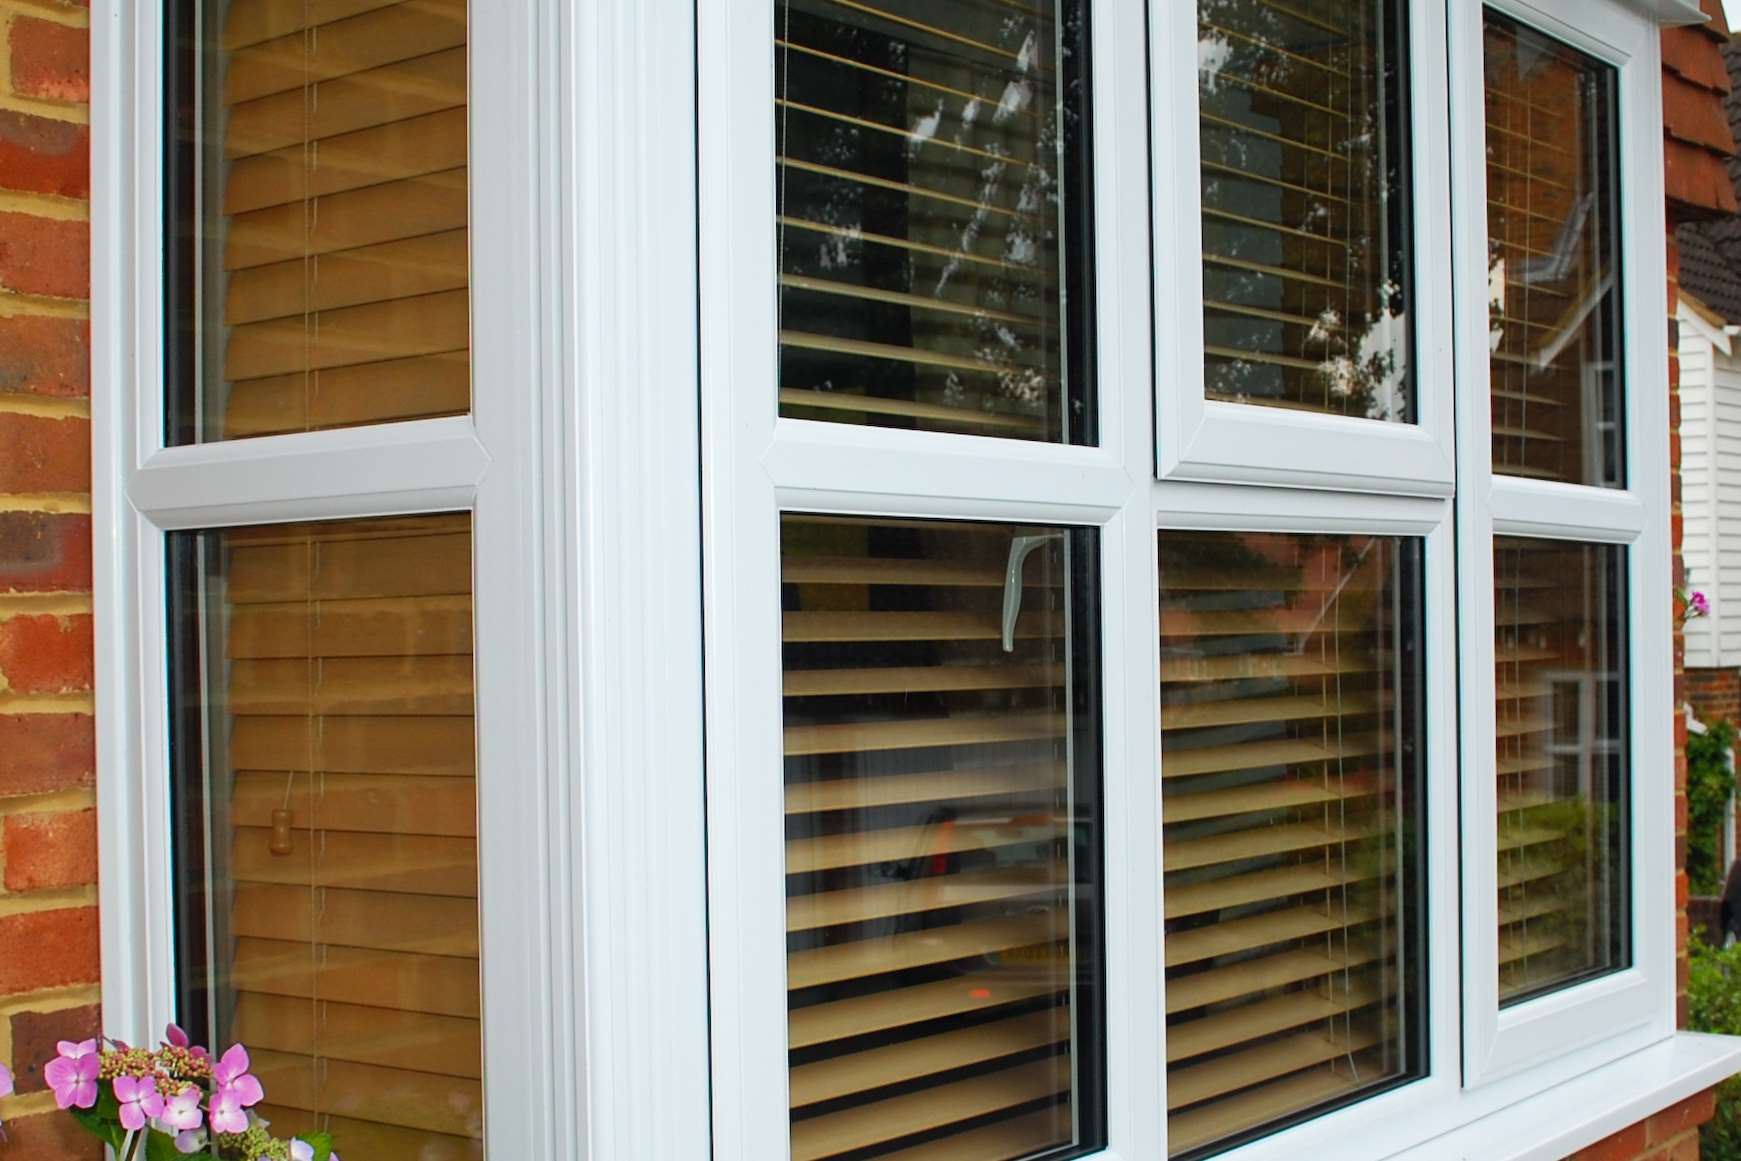 UPVC triple glazed windows could cut your heating bill by nearly £500